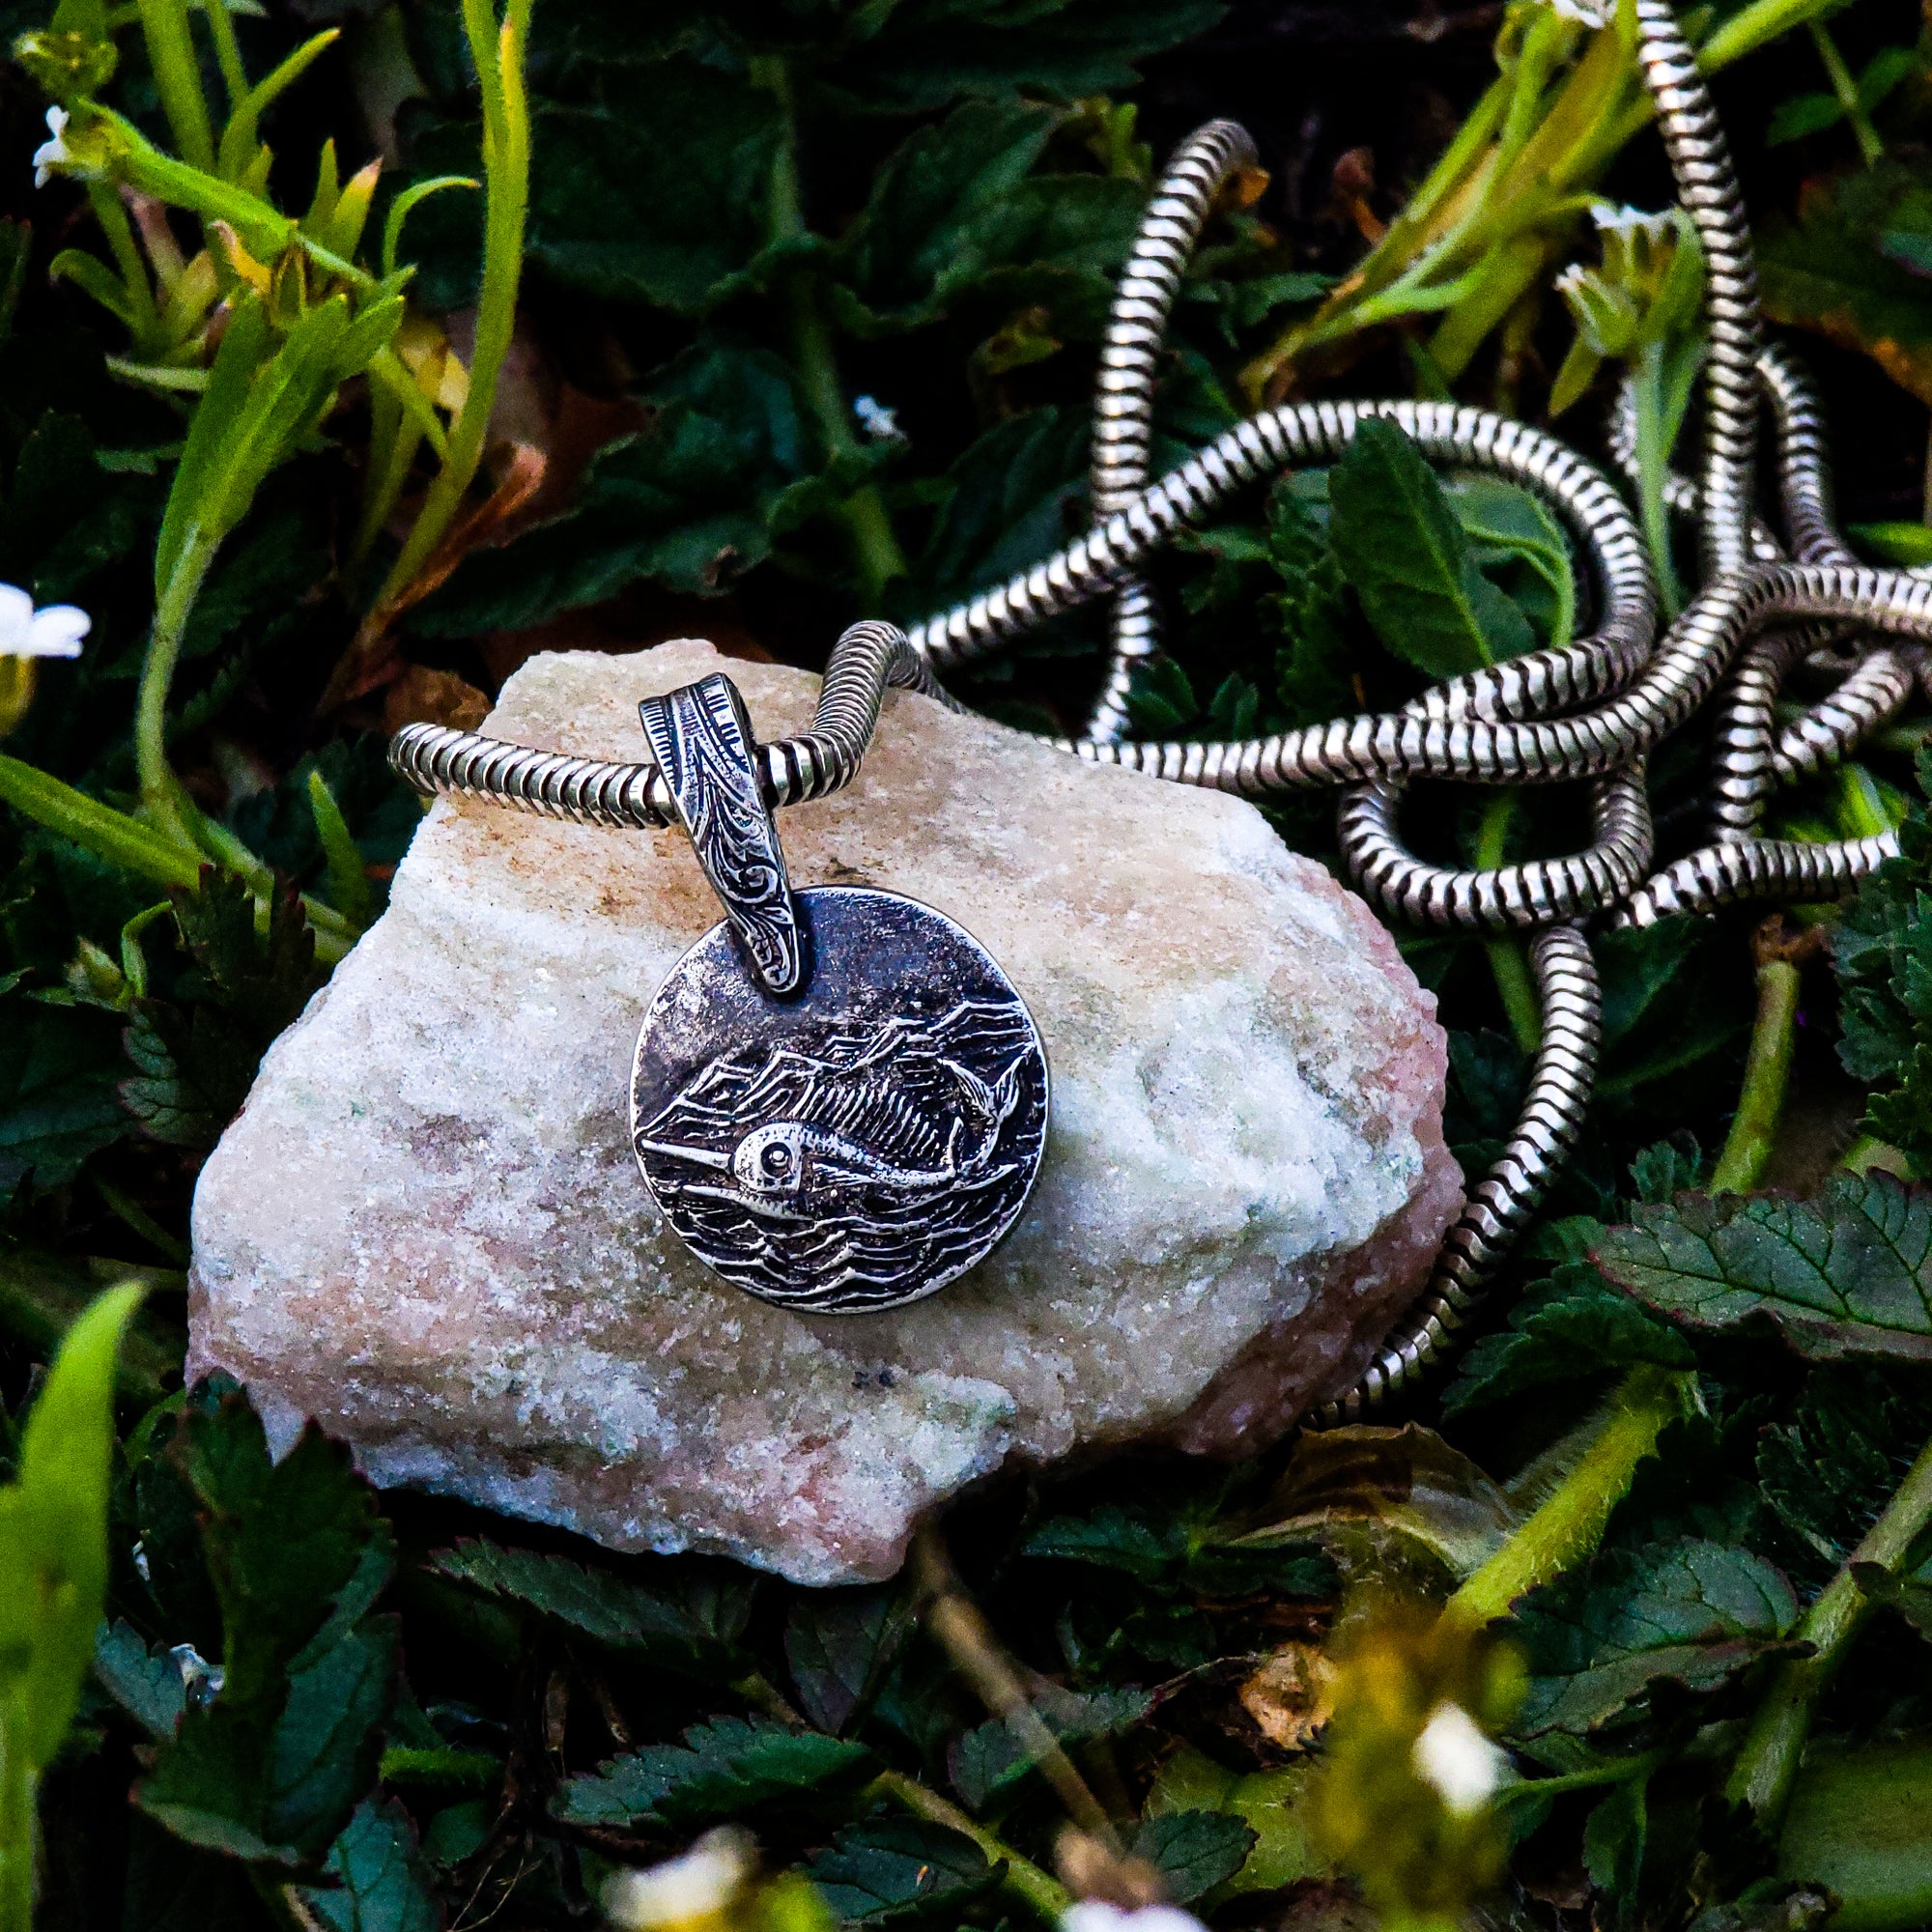 This photo showcases our stunning handmade solid sterling silver Swordfish in Silver Seas pendant. The pendant features a swordfish swimming in the ocean under a stormy sky. The pendant is resting on a beige rock and surrounded by lush green foliage.